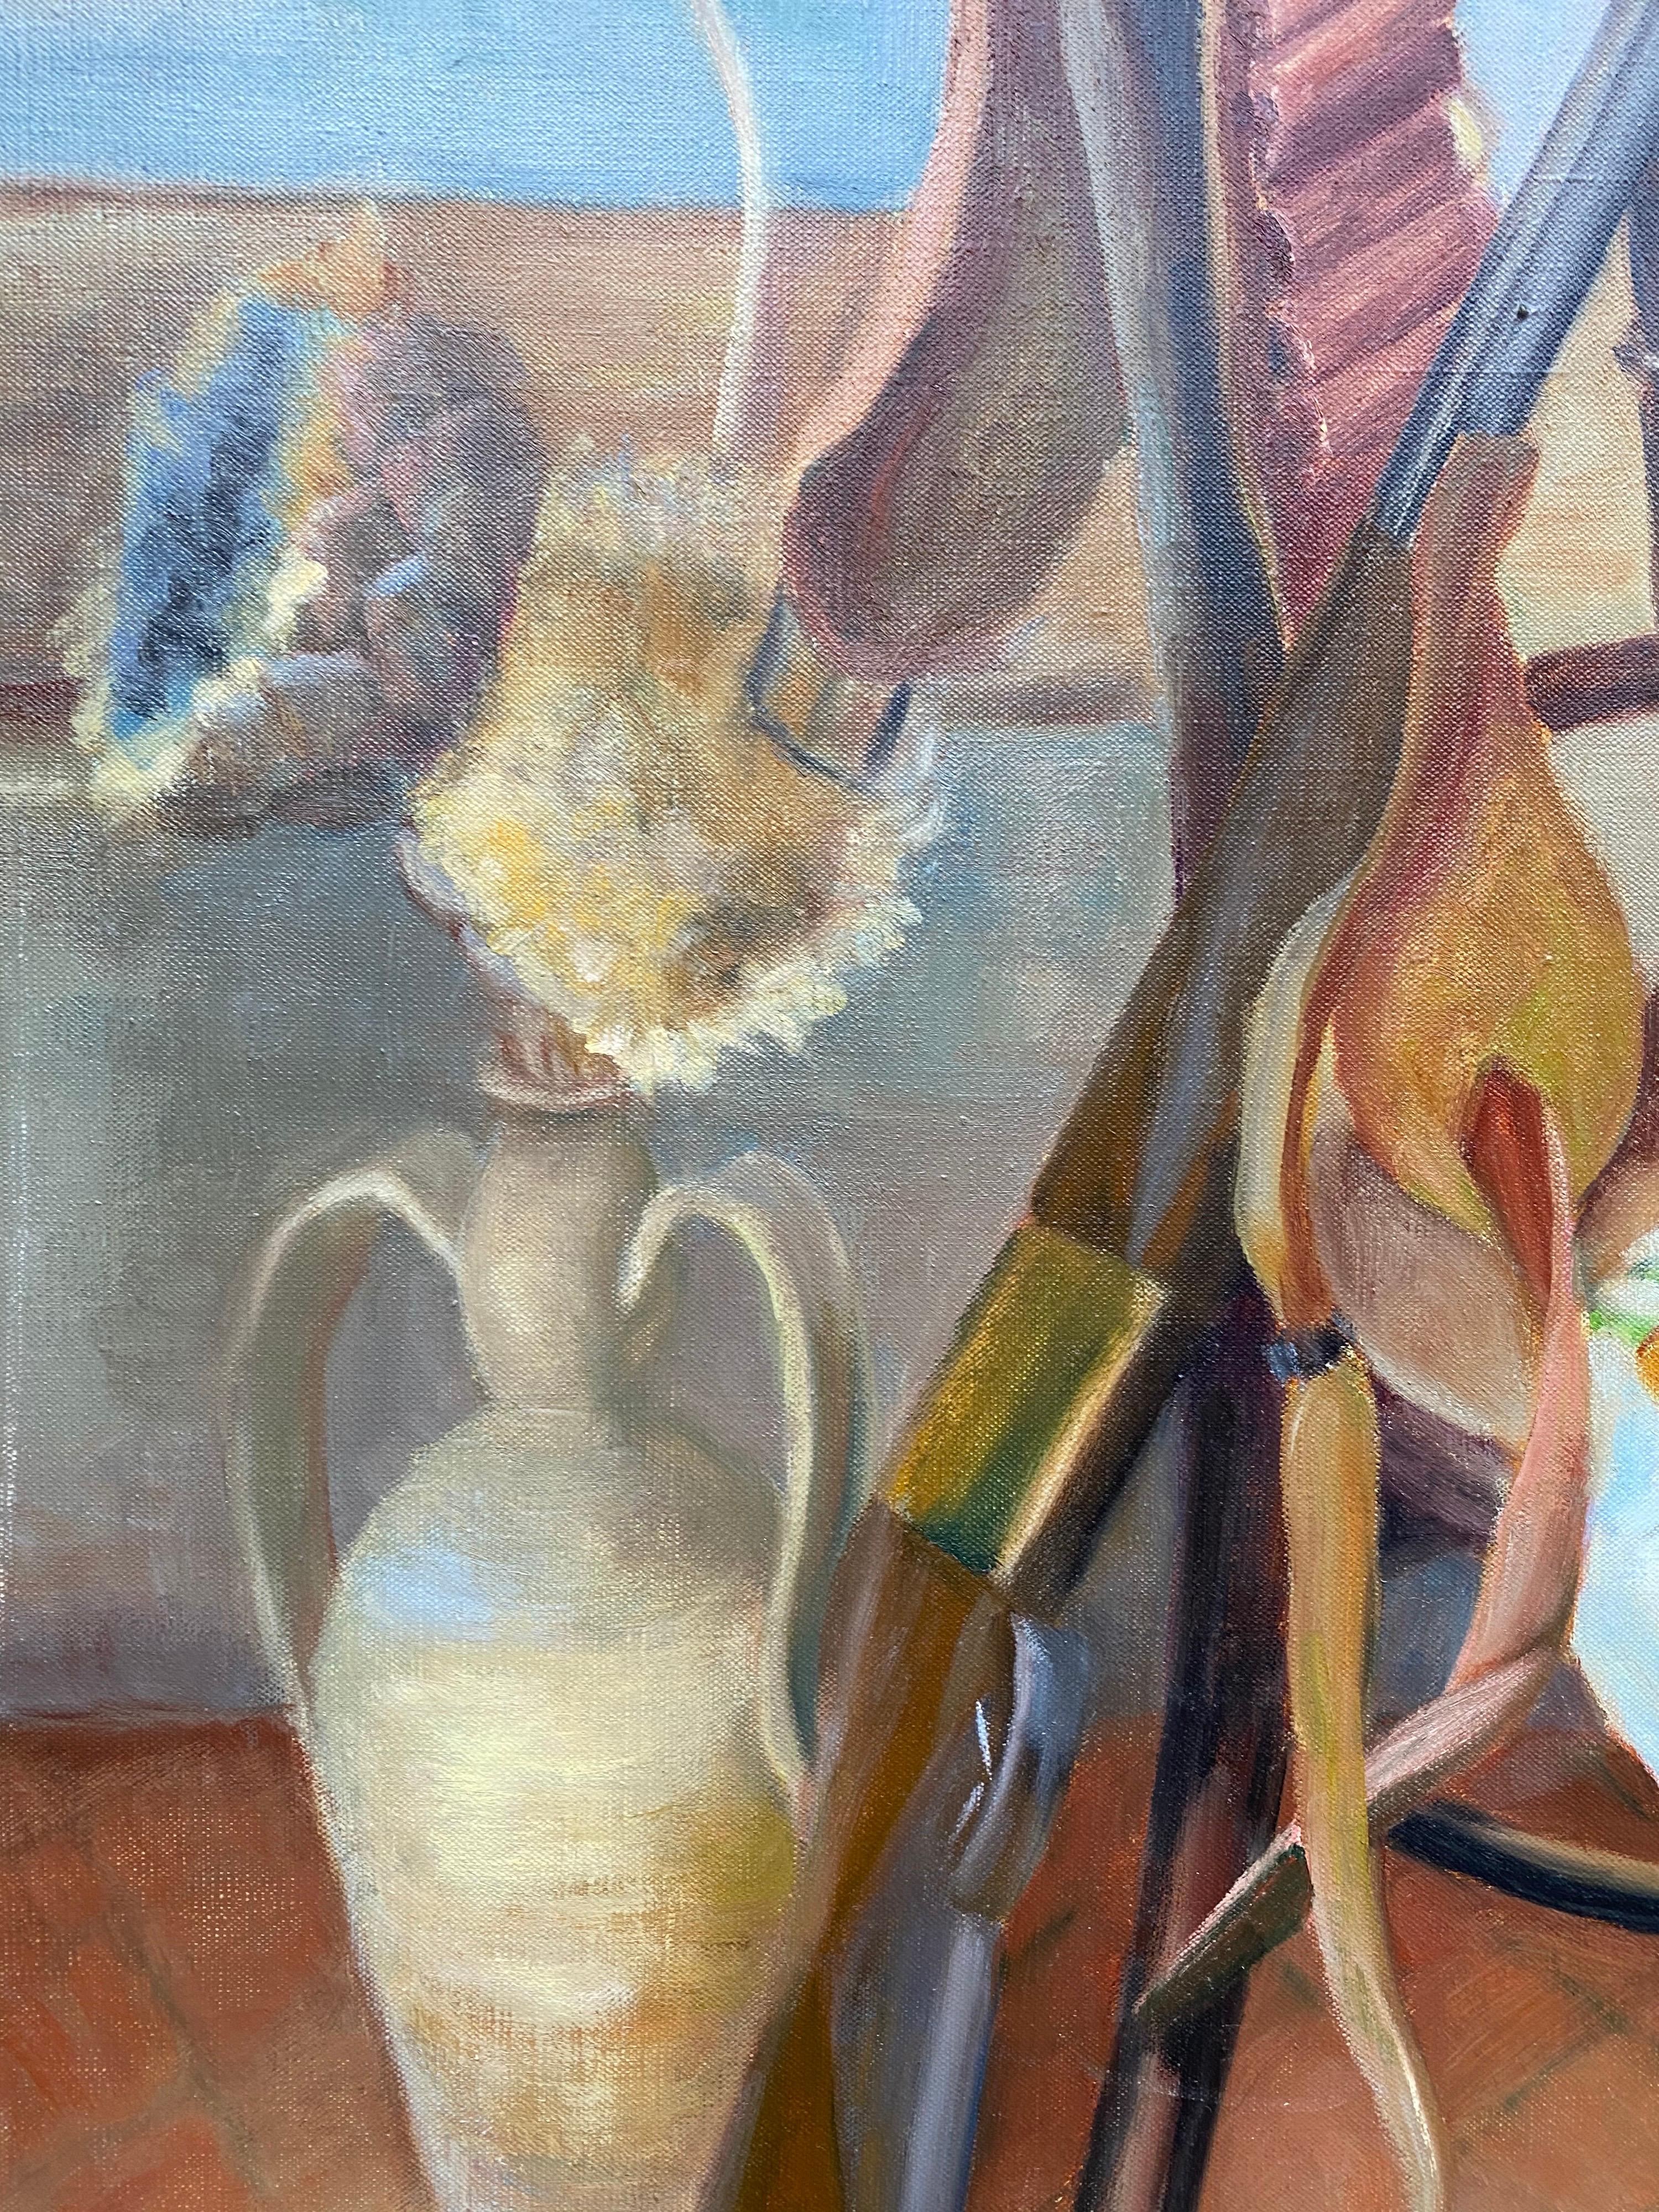 Artist: Yvette Bossiere (French, b.1926) signed lower corner and verso

Title: Huntsman's Still Life

Medium: oil painting on canvas, unframed

Size: painting: 36.5 x 29 inches

Provenance: the artists estate, France

Condition: overall good